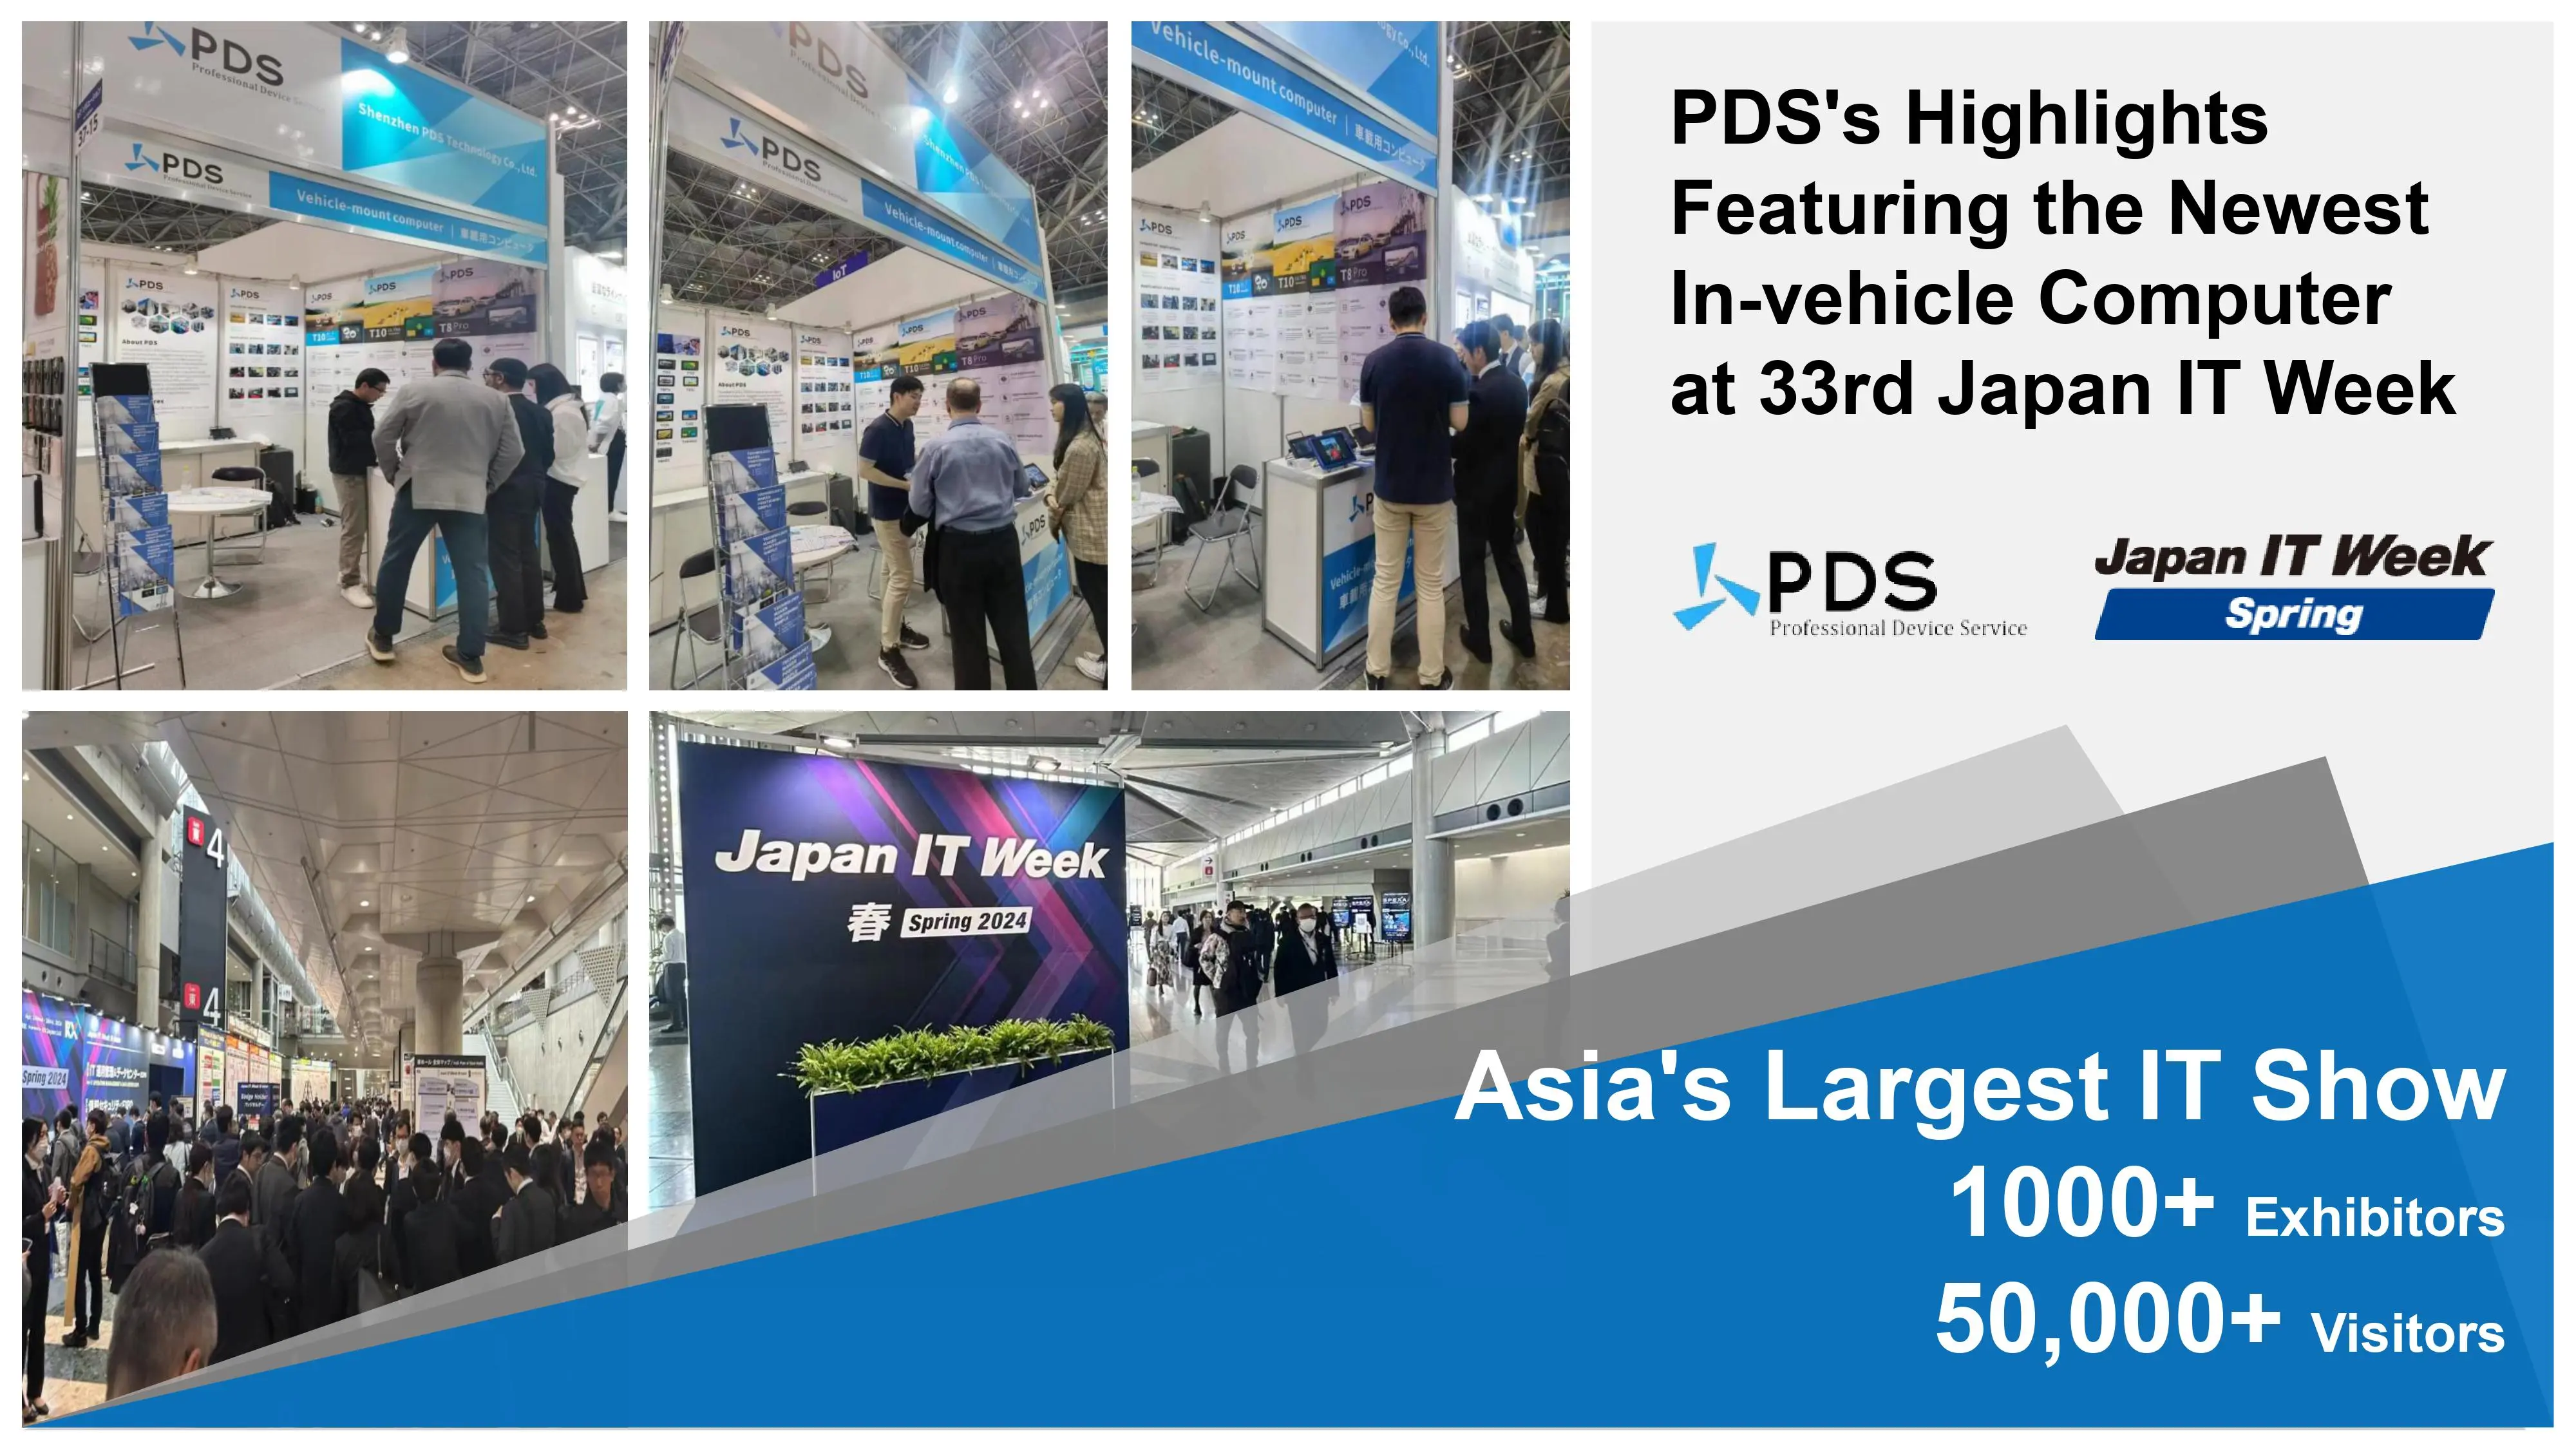 PDS's Highlights Featuring the Newest In-vehicle Computer at the 33rd Japan IT Week